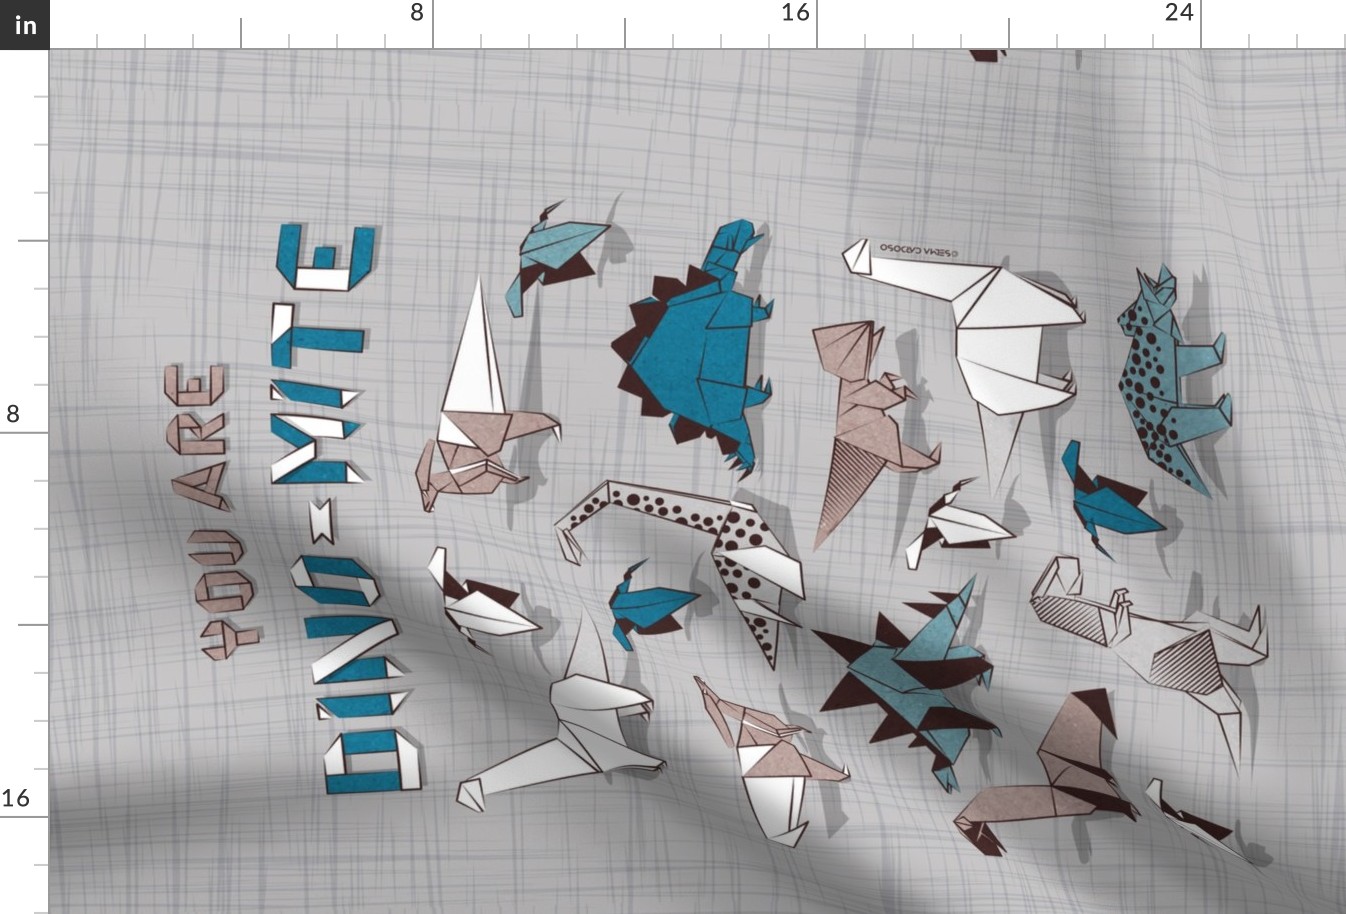 You are dino-mite punderful quote TEA TOWEL // grey linen texture background paper blue grey and white origami dinosaurs 